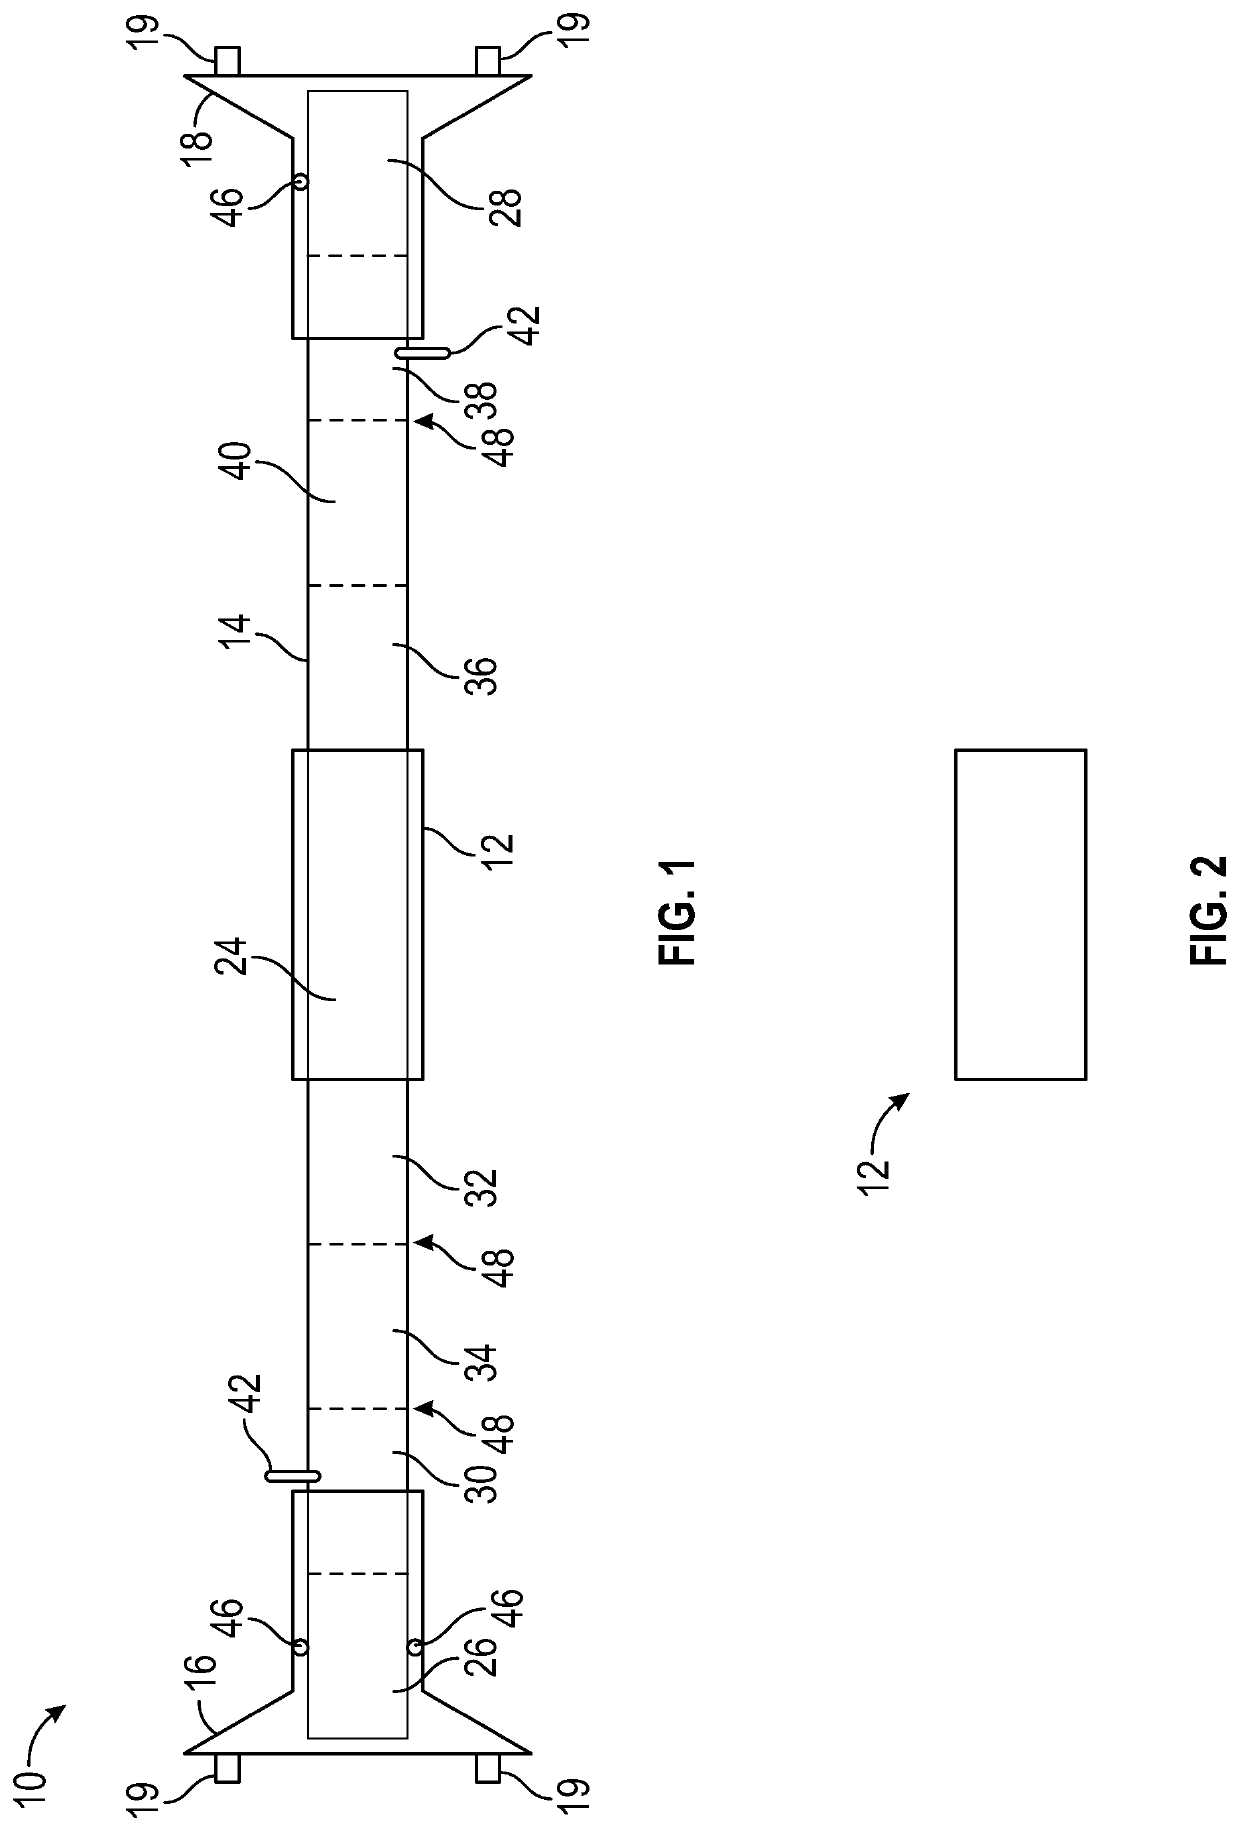 Exercise Device and Method